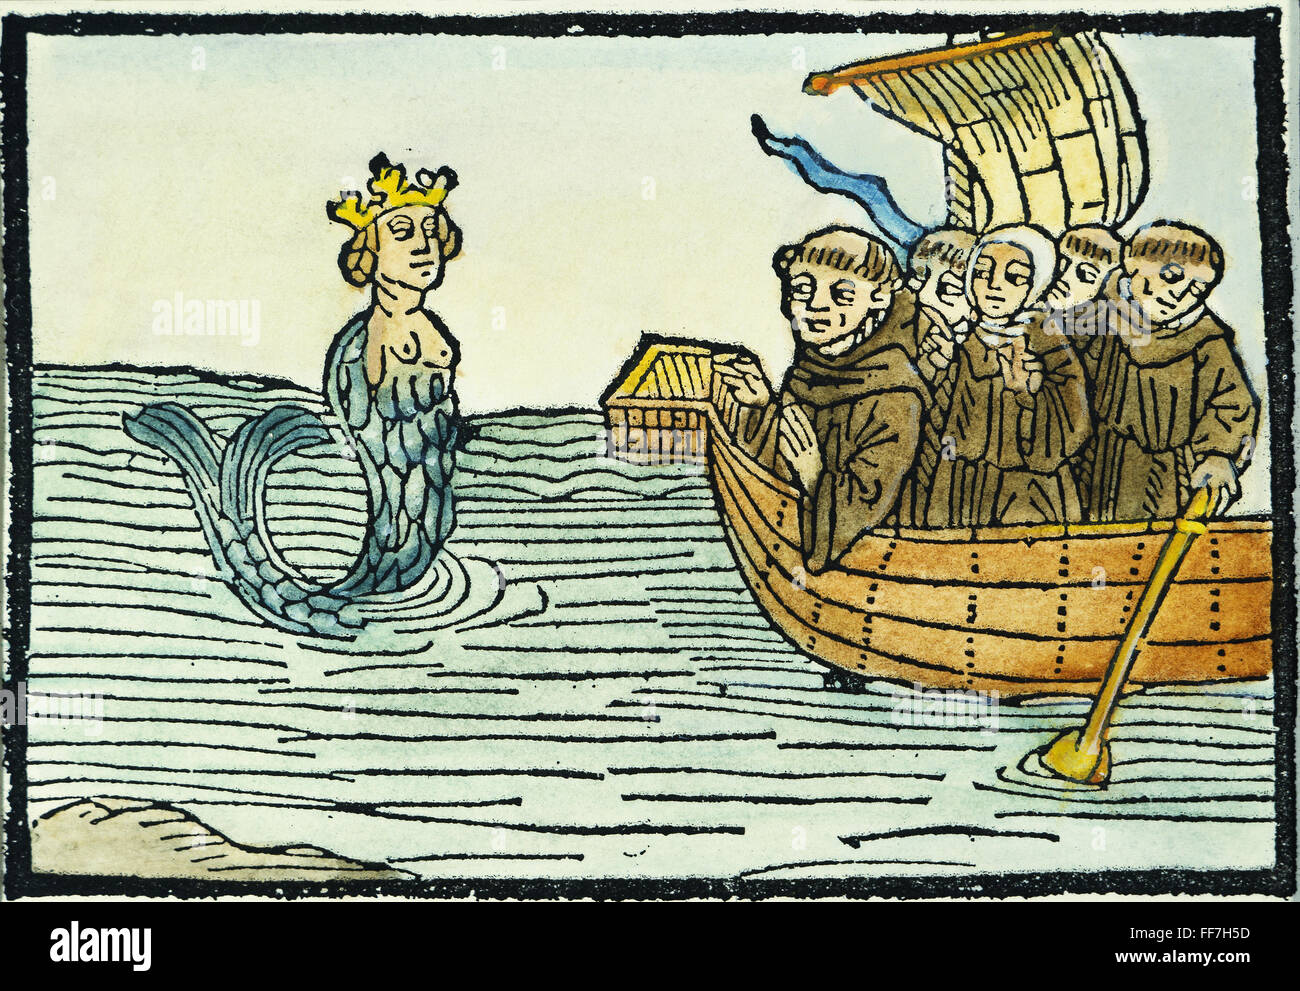 ST. BRENDAN: SIREN. /nSt. Brendan (484-577) and his monks encounter a siren of the seas: colored woodcut from a German version of Navigato, printed at Ulm in 1499. Stock Photo